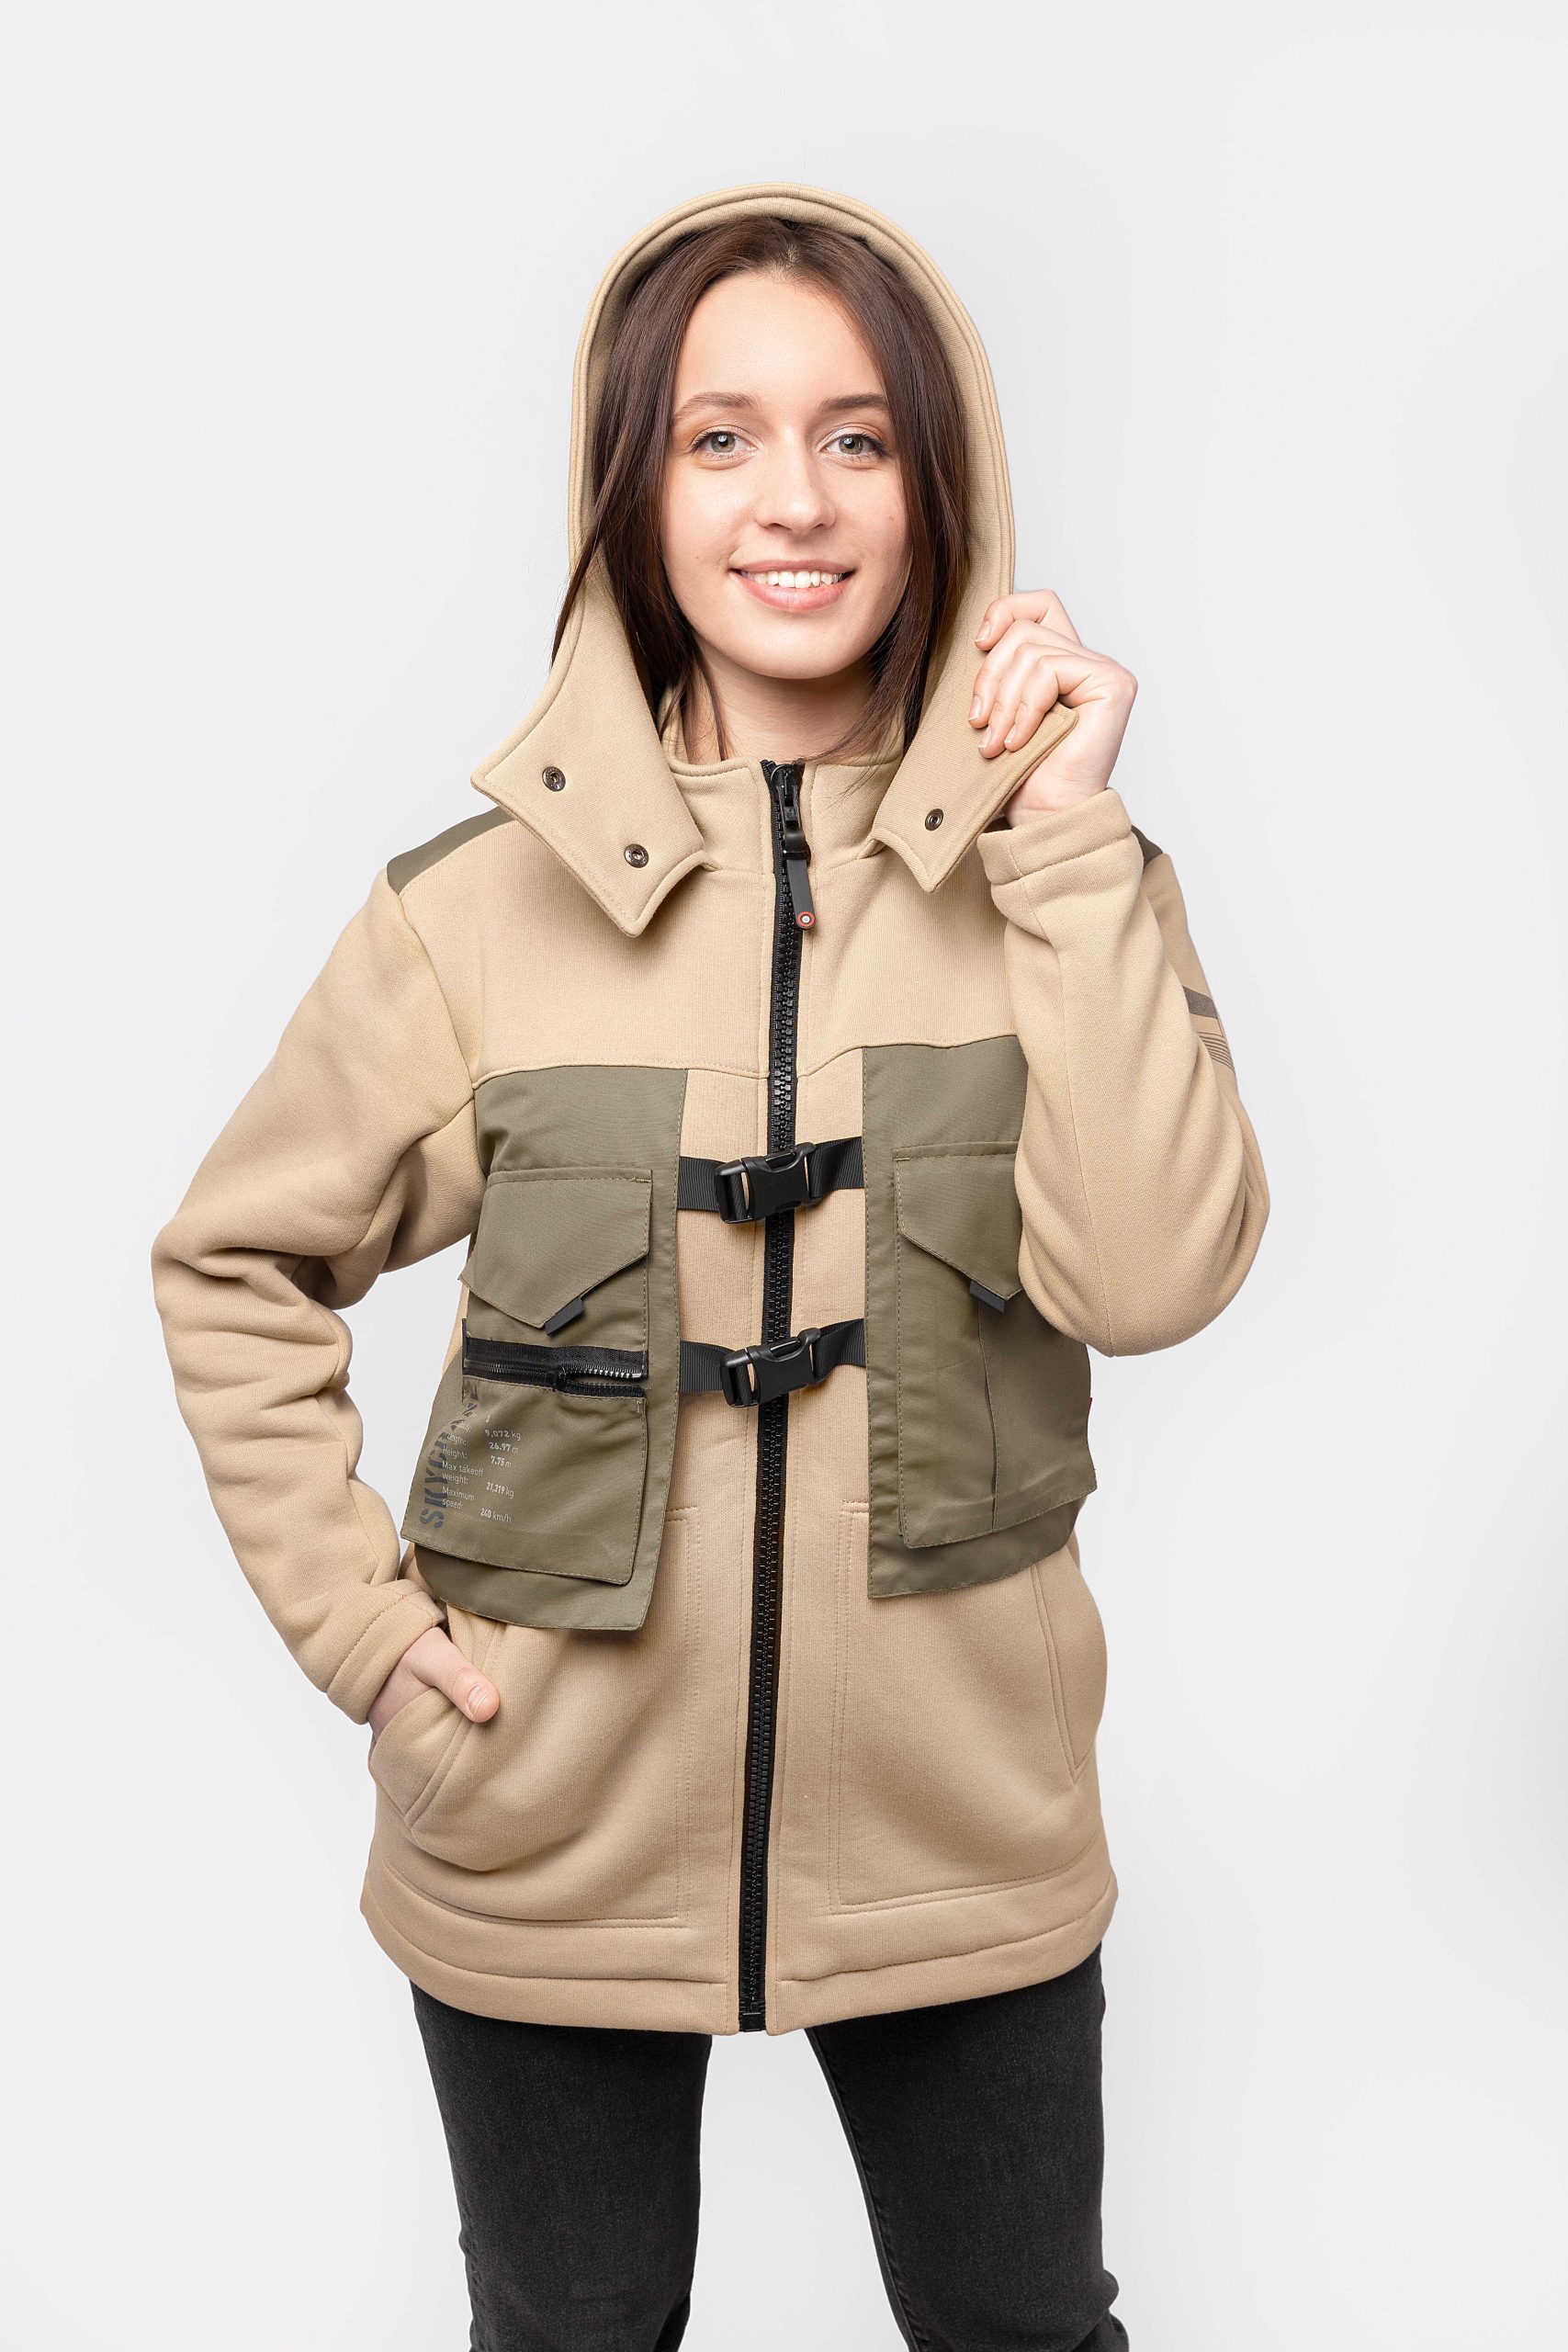 Women's Hoodie Skycrane. Color sand. 
Size worn by the model: XS.